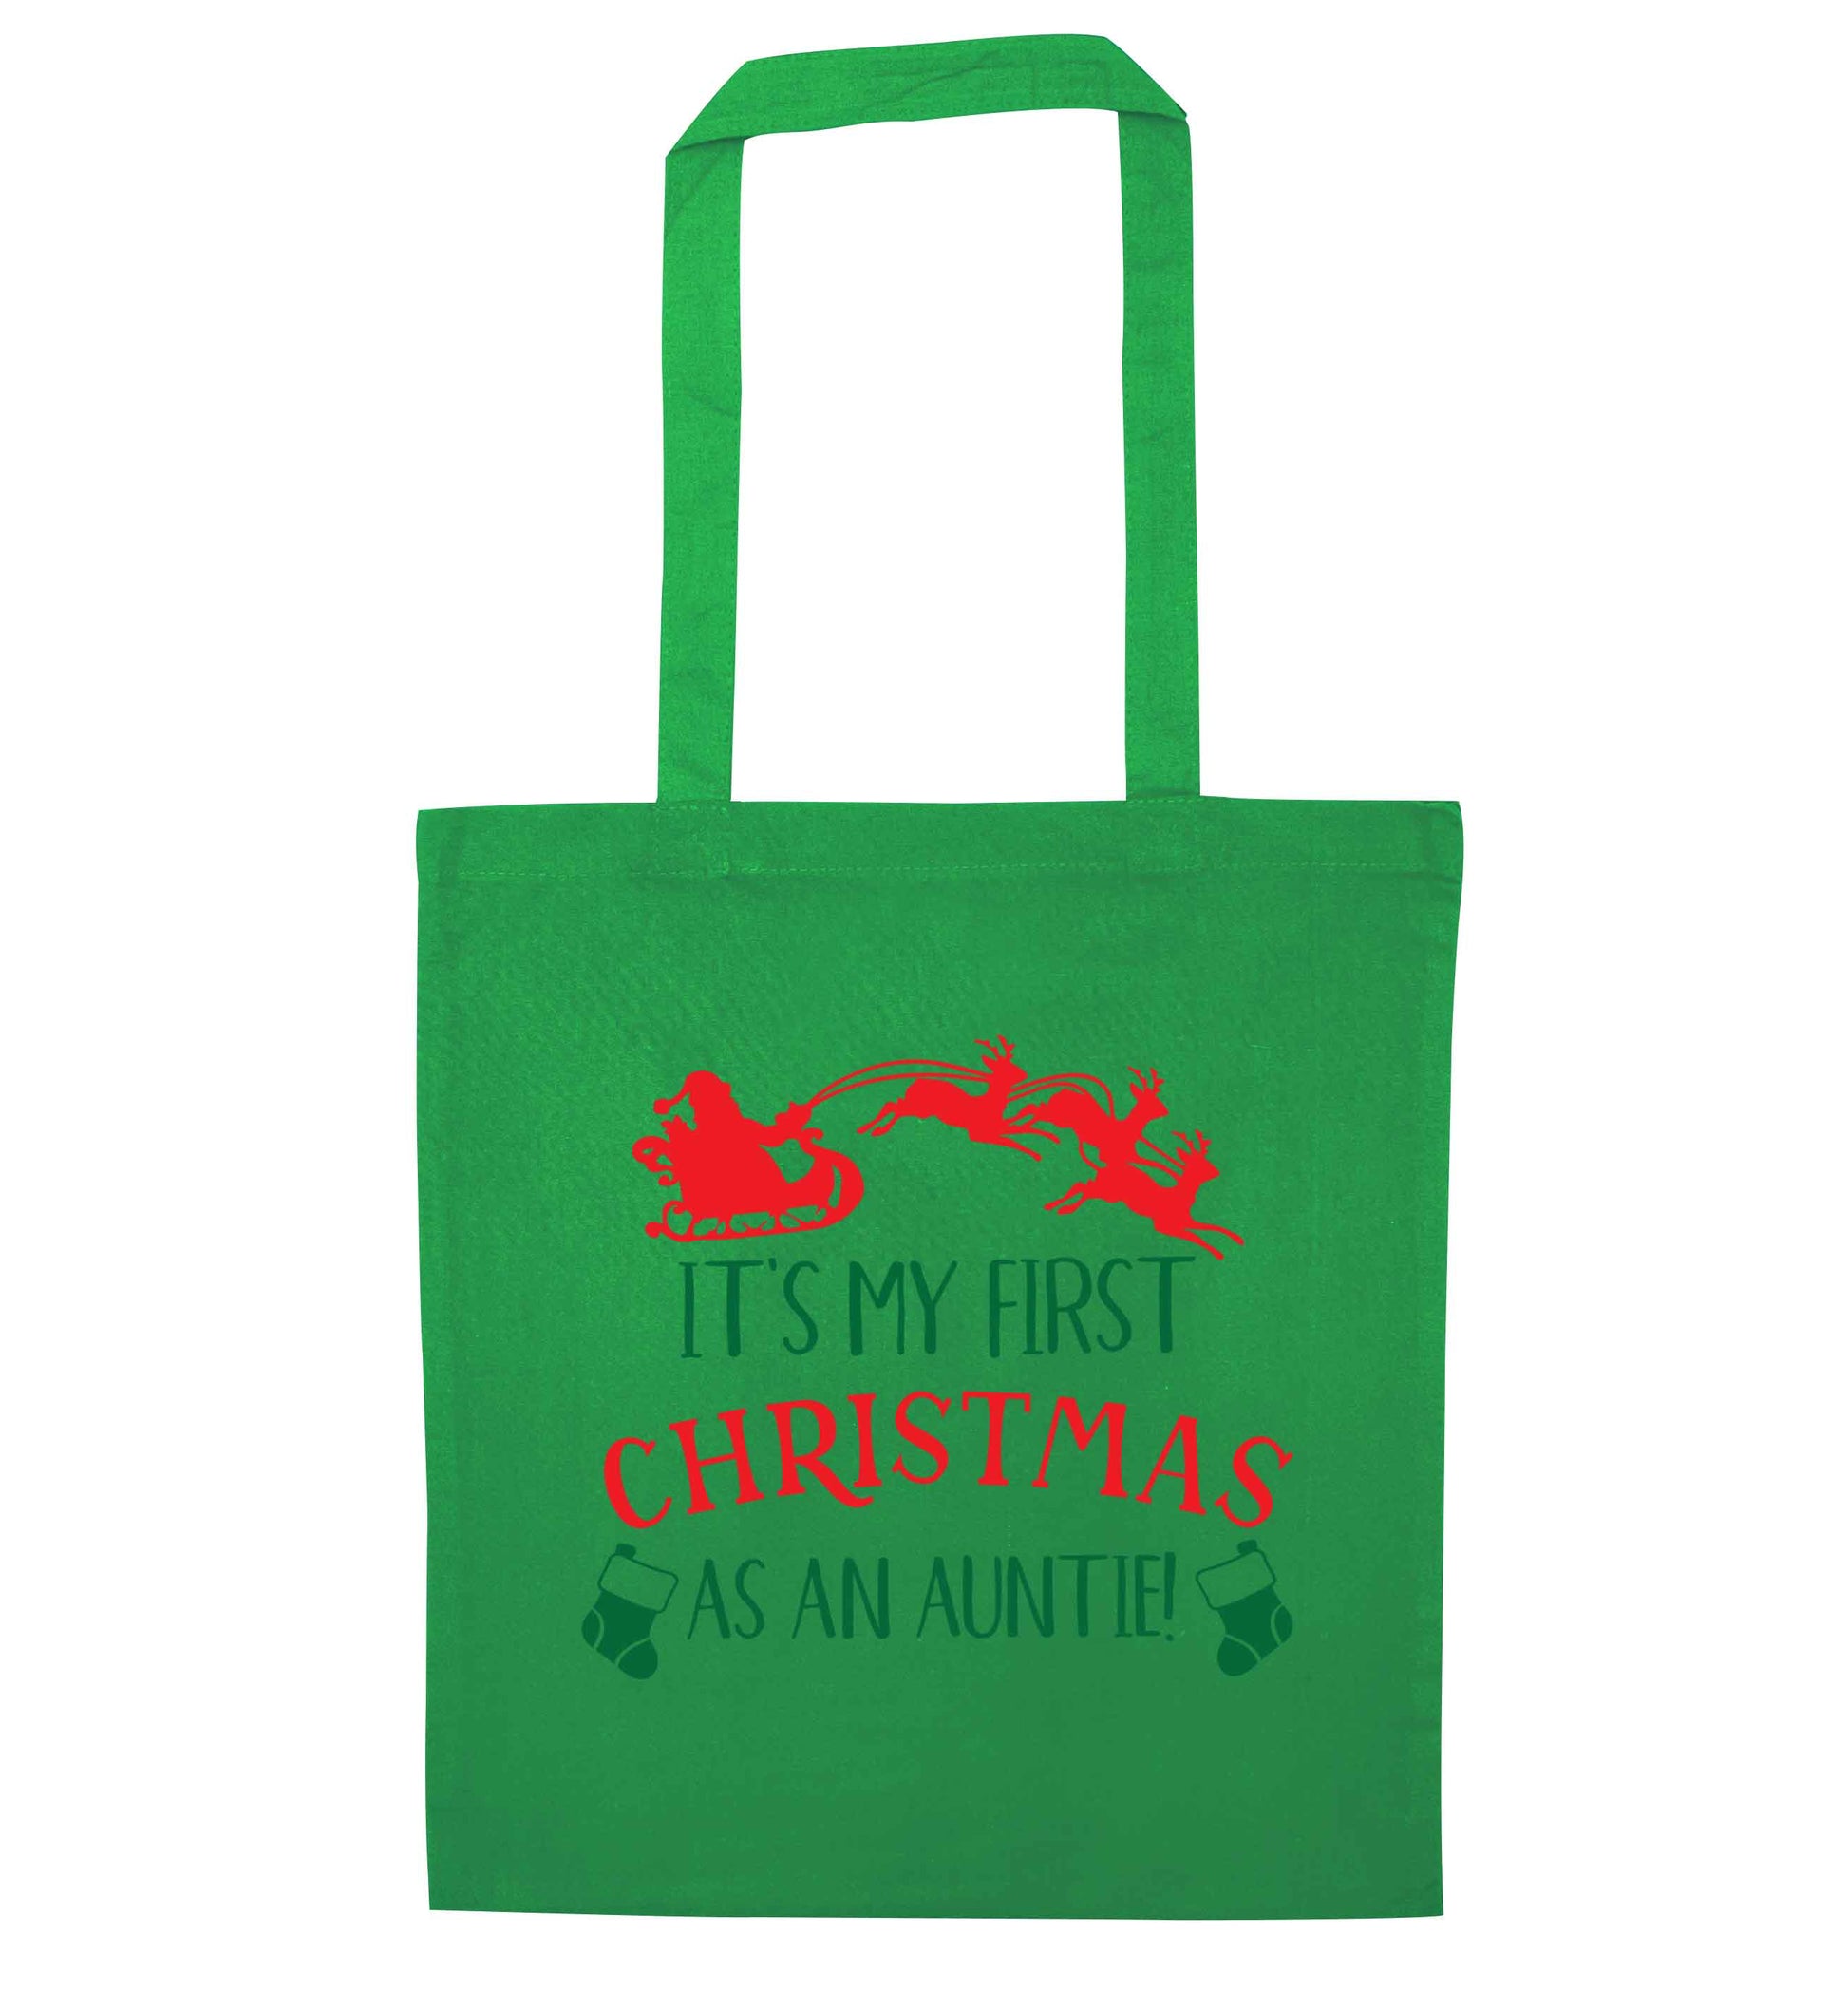 It's my first Christmas as an auntie! green tote bag